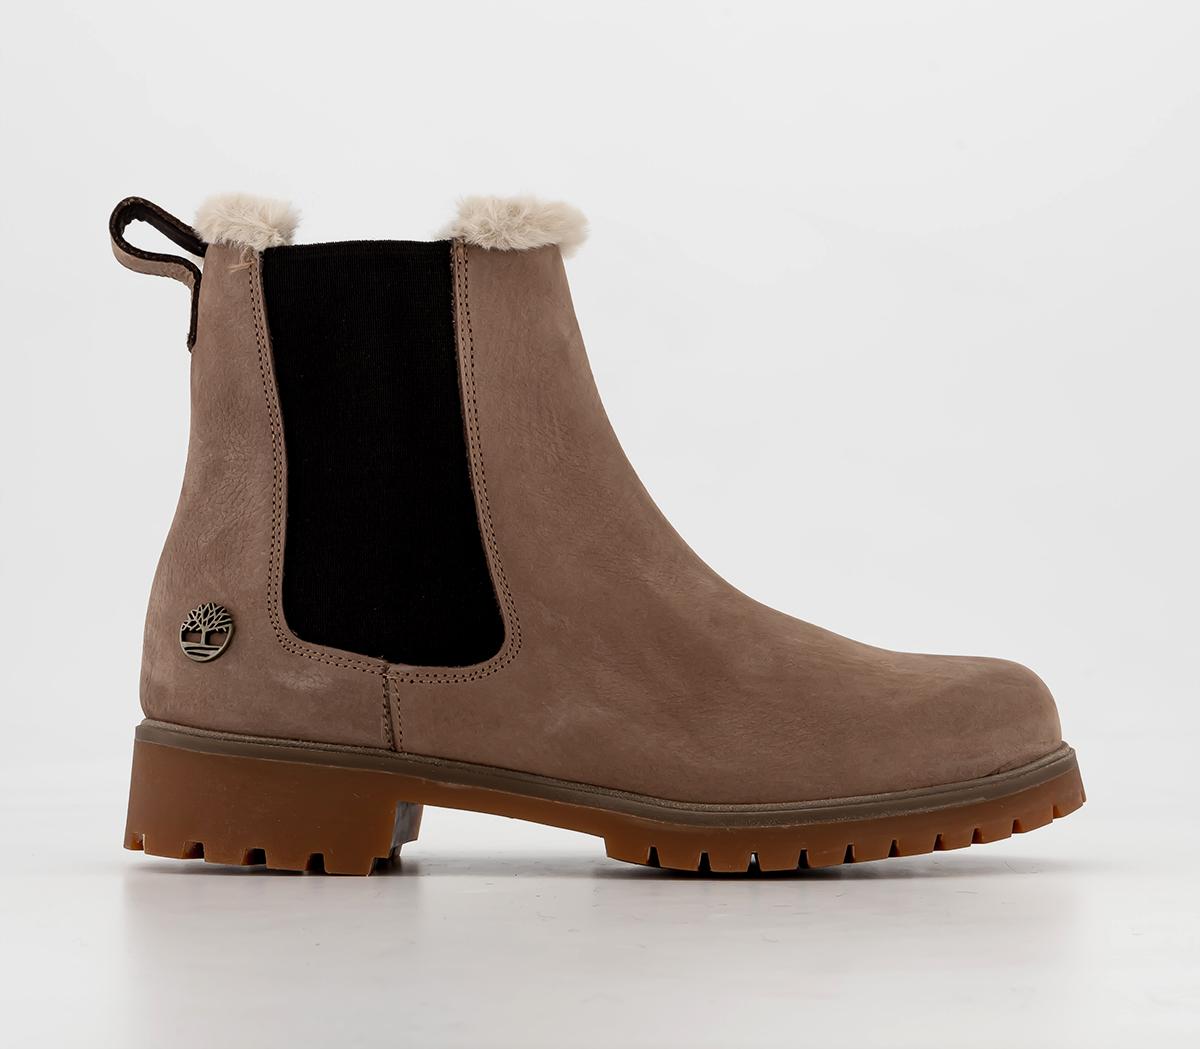 Timberland Timberland Lyonsdale Chelsea Boots Tan Fur Lined - Women's Boots